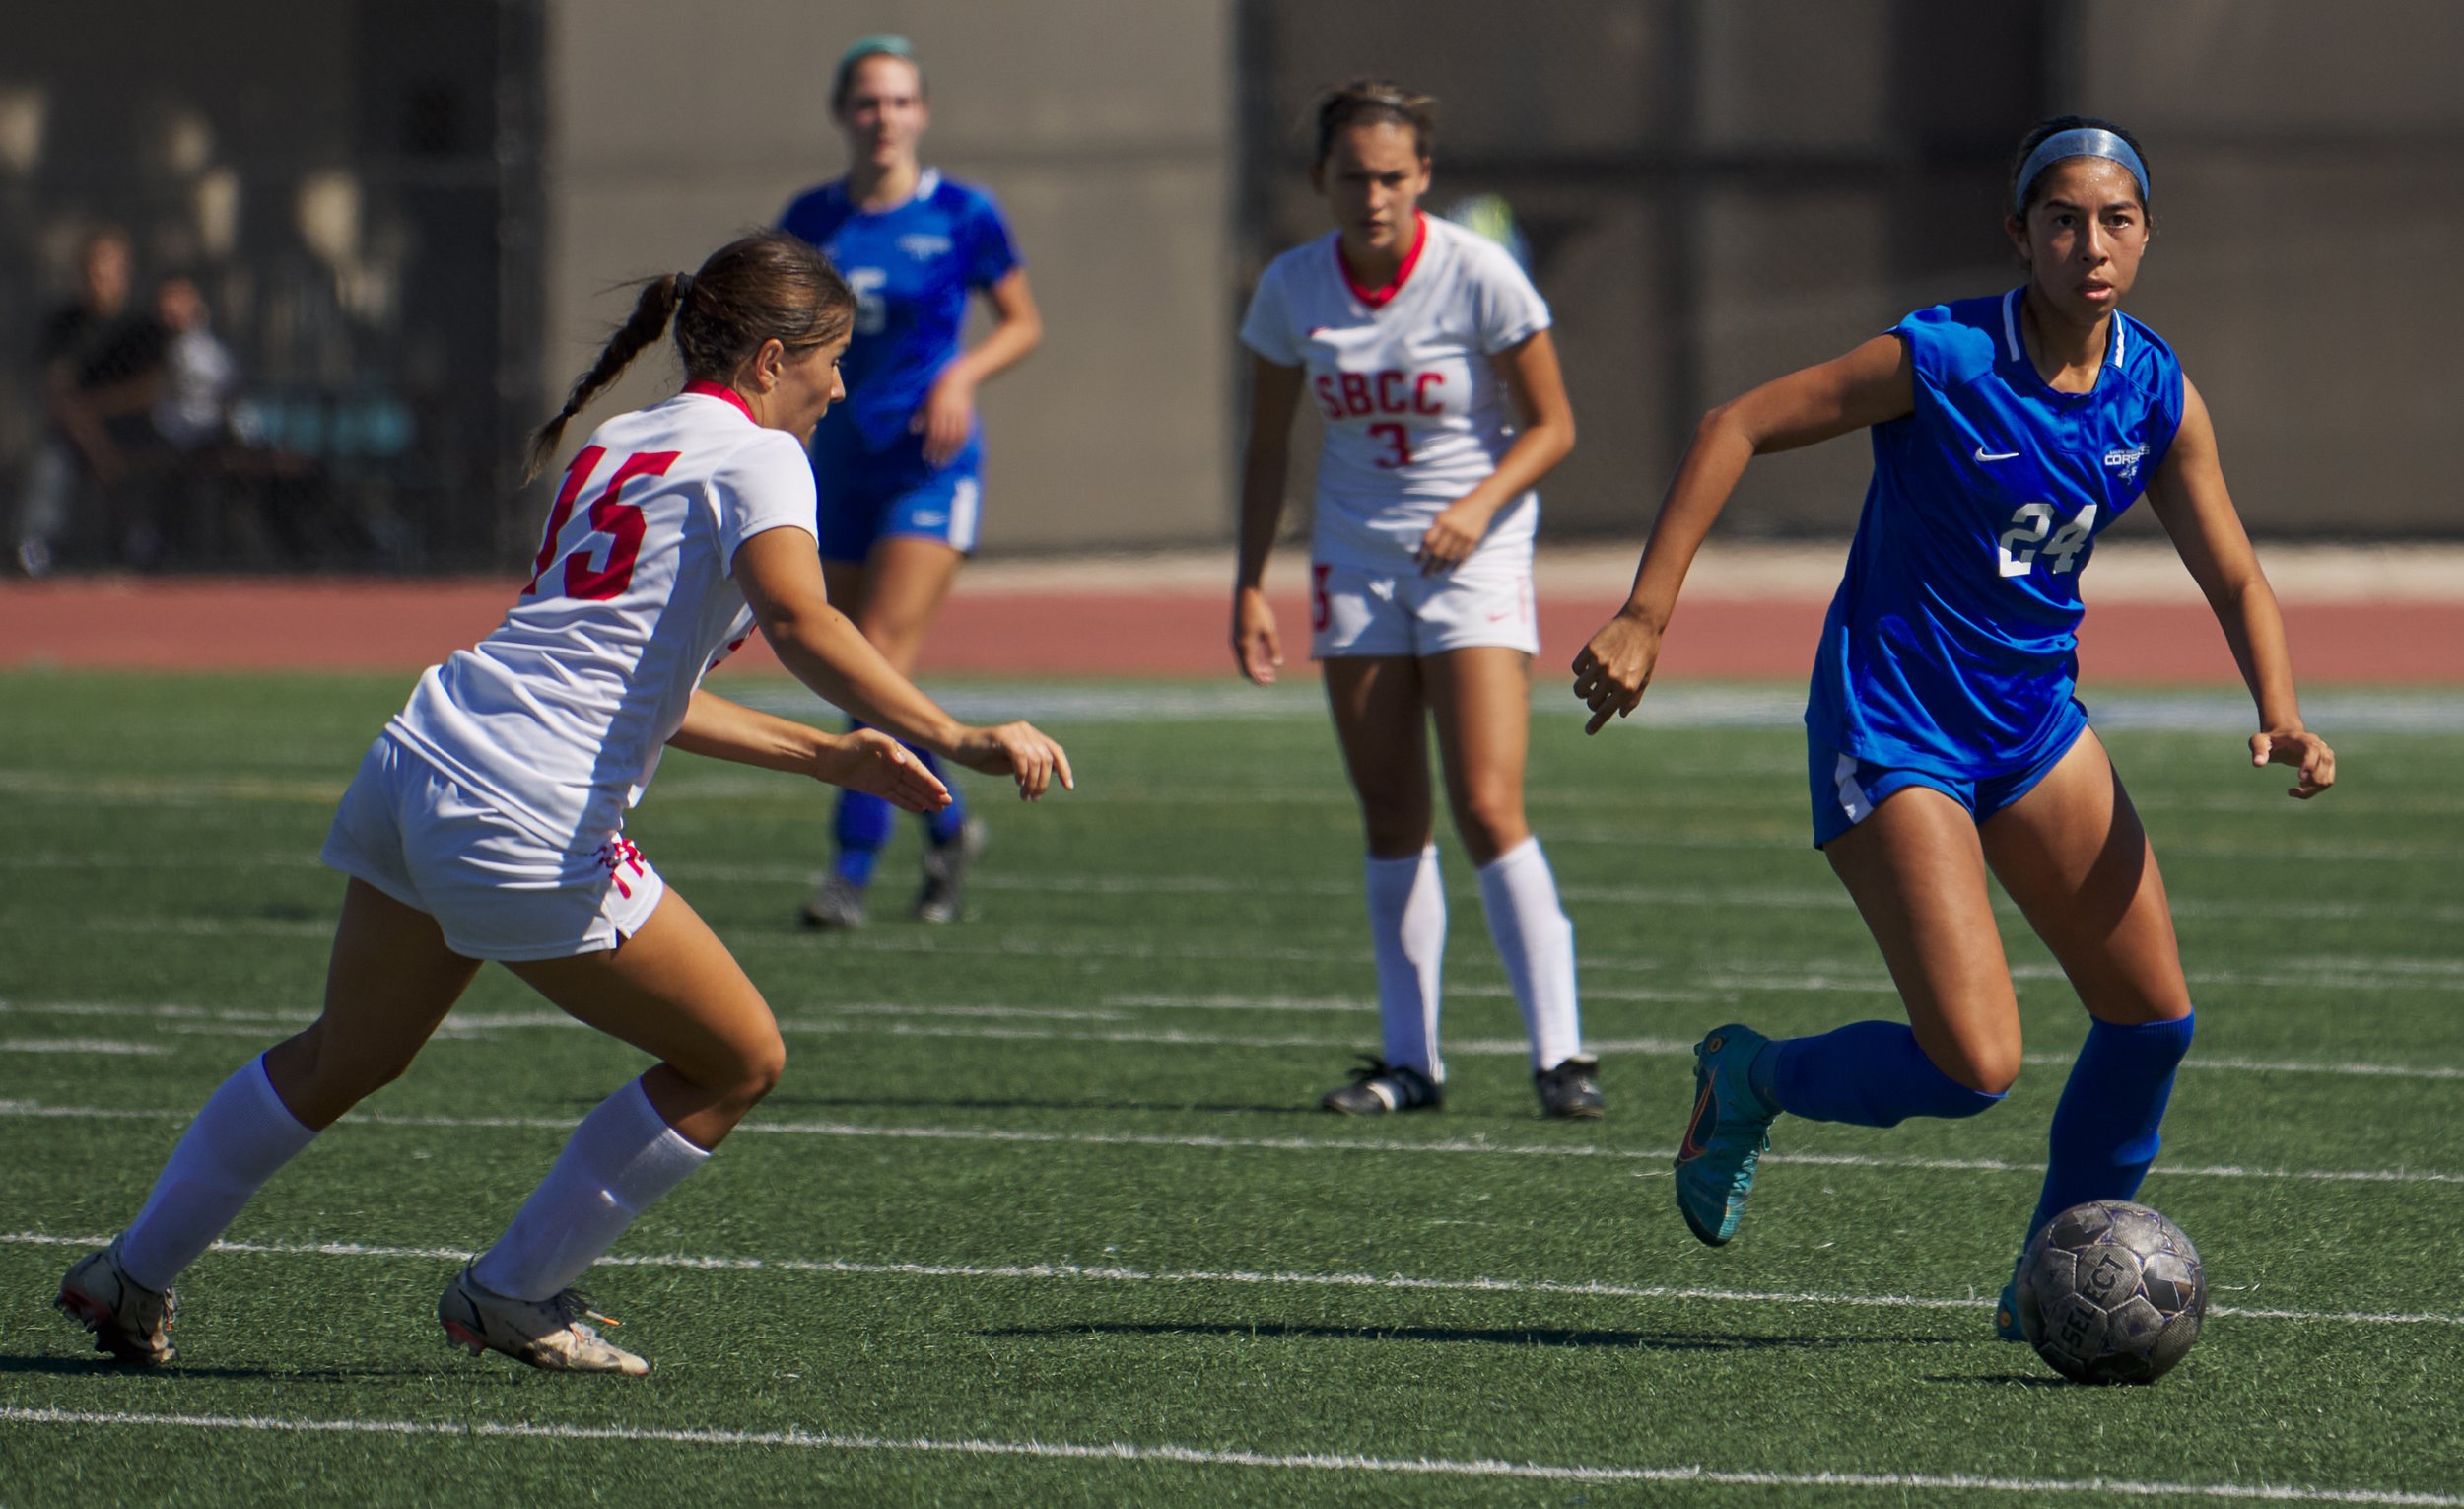  Santa Monica College Corsairs' Andrea Ortiz (right) and Santa Barbara City College Vaqueros' Dakota Thyssen (left) during the women's soccer game on Tuesday, Sept. 20, 2022, at Corsair Field in Santa Monica, Calif. The game ended in a 1-1 tie. (Nich